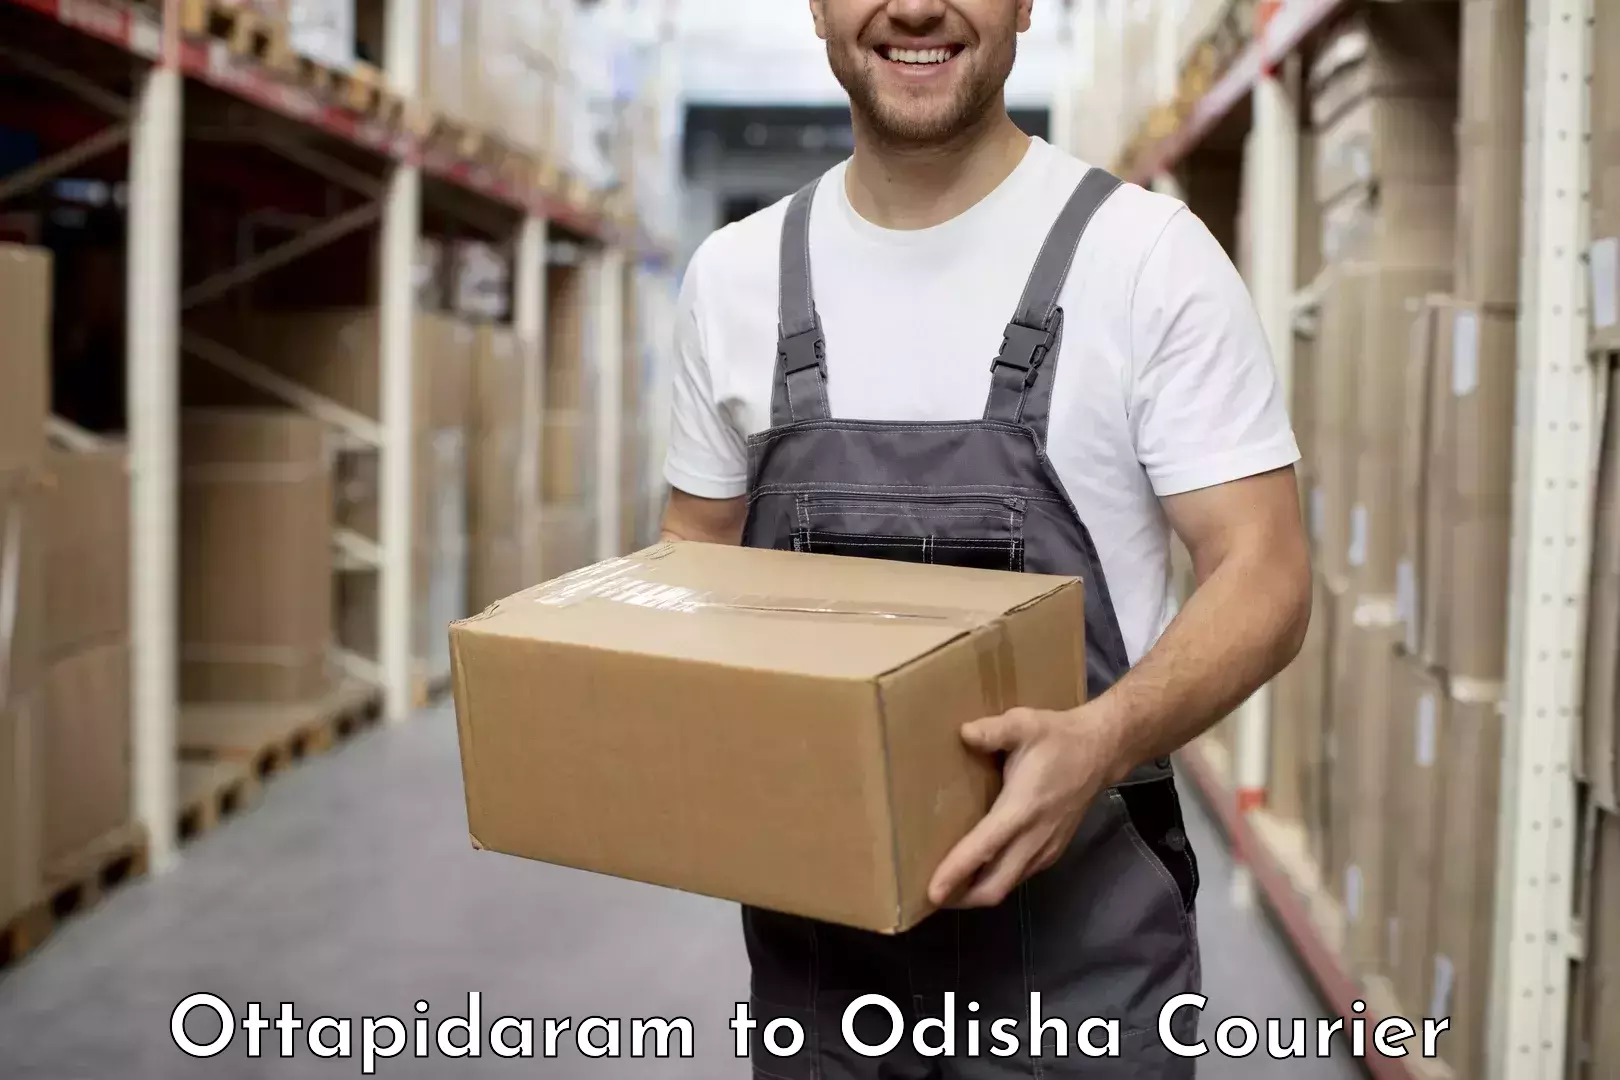 Nationwide parcel services Ottapidaram to Chatrapur